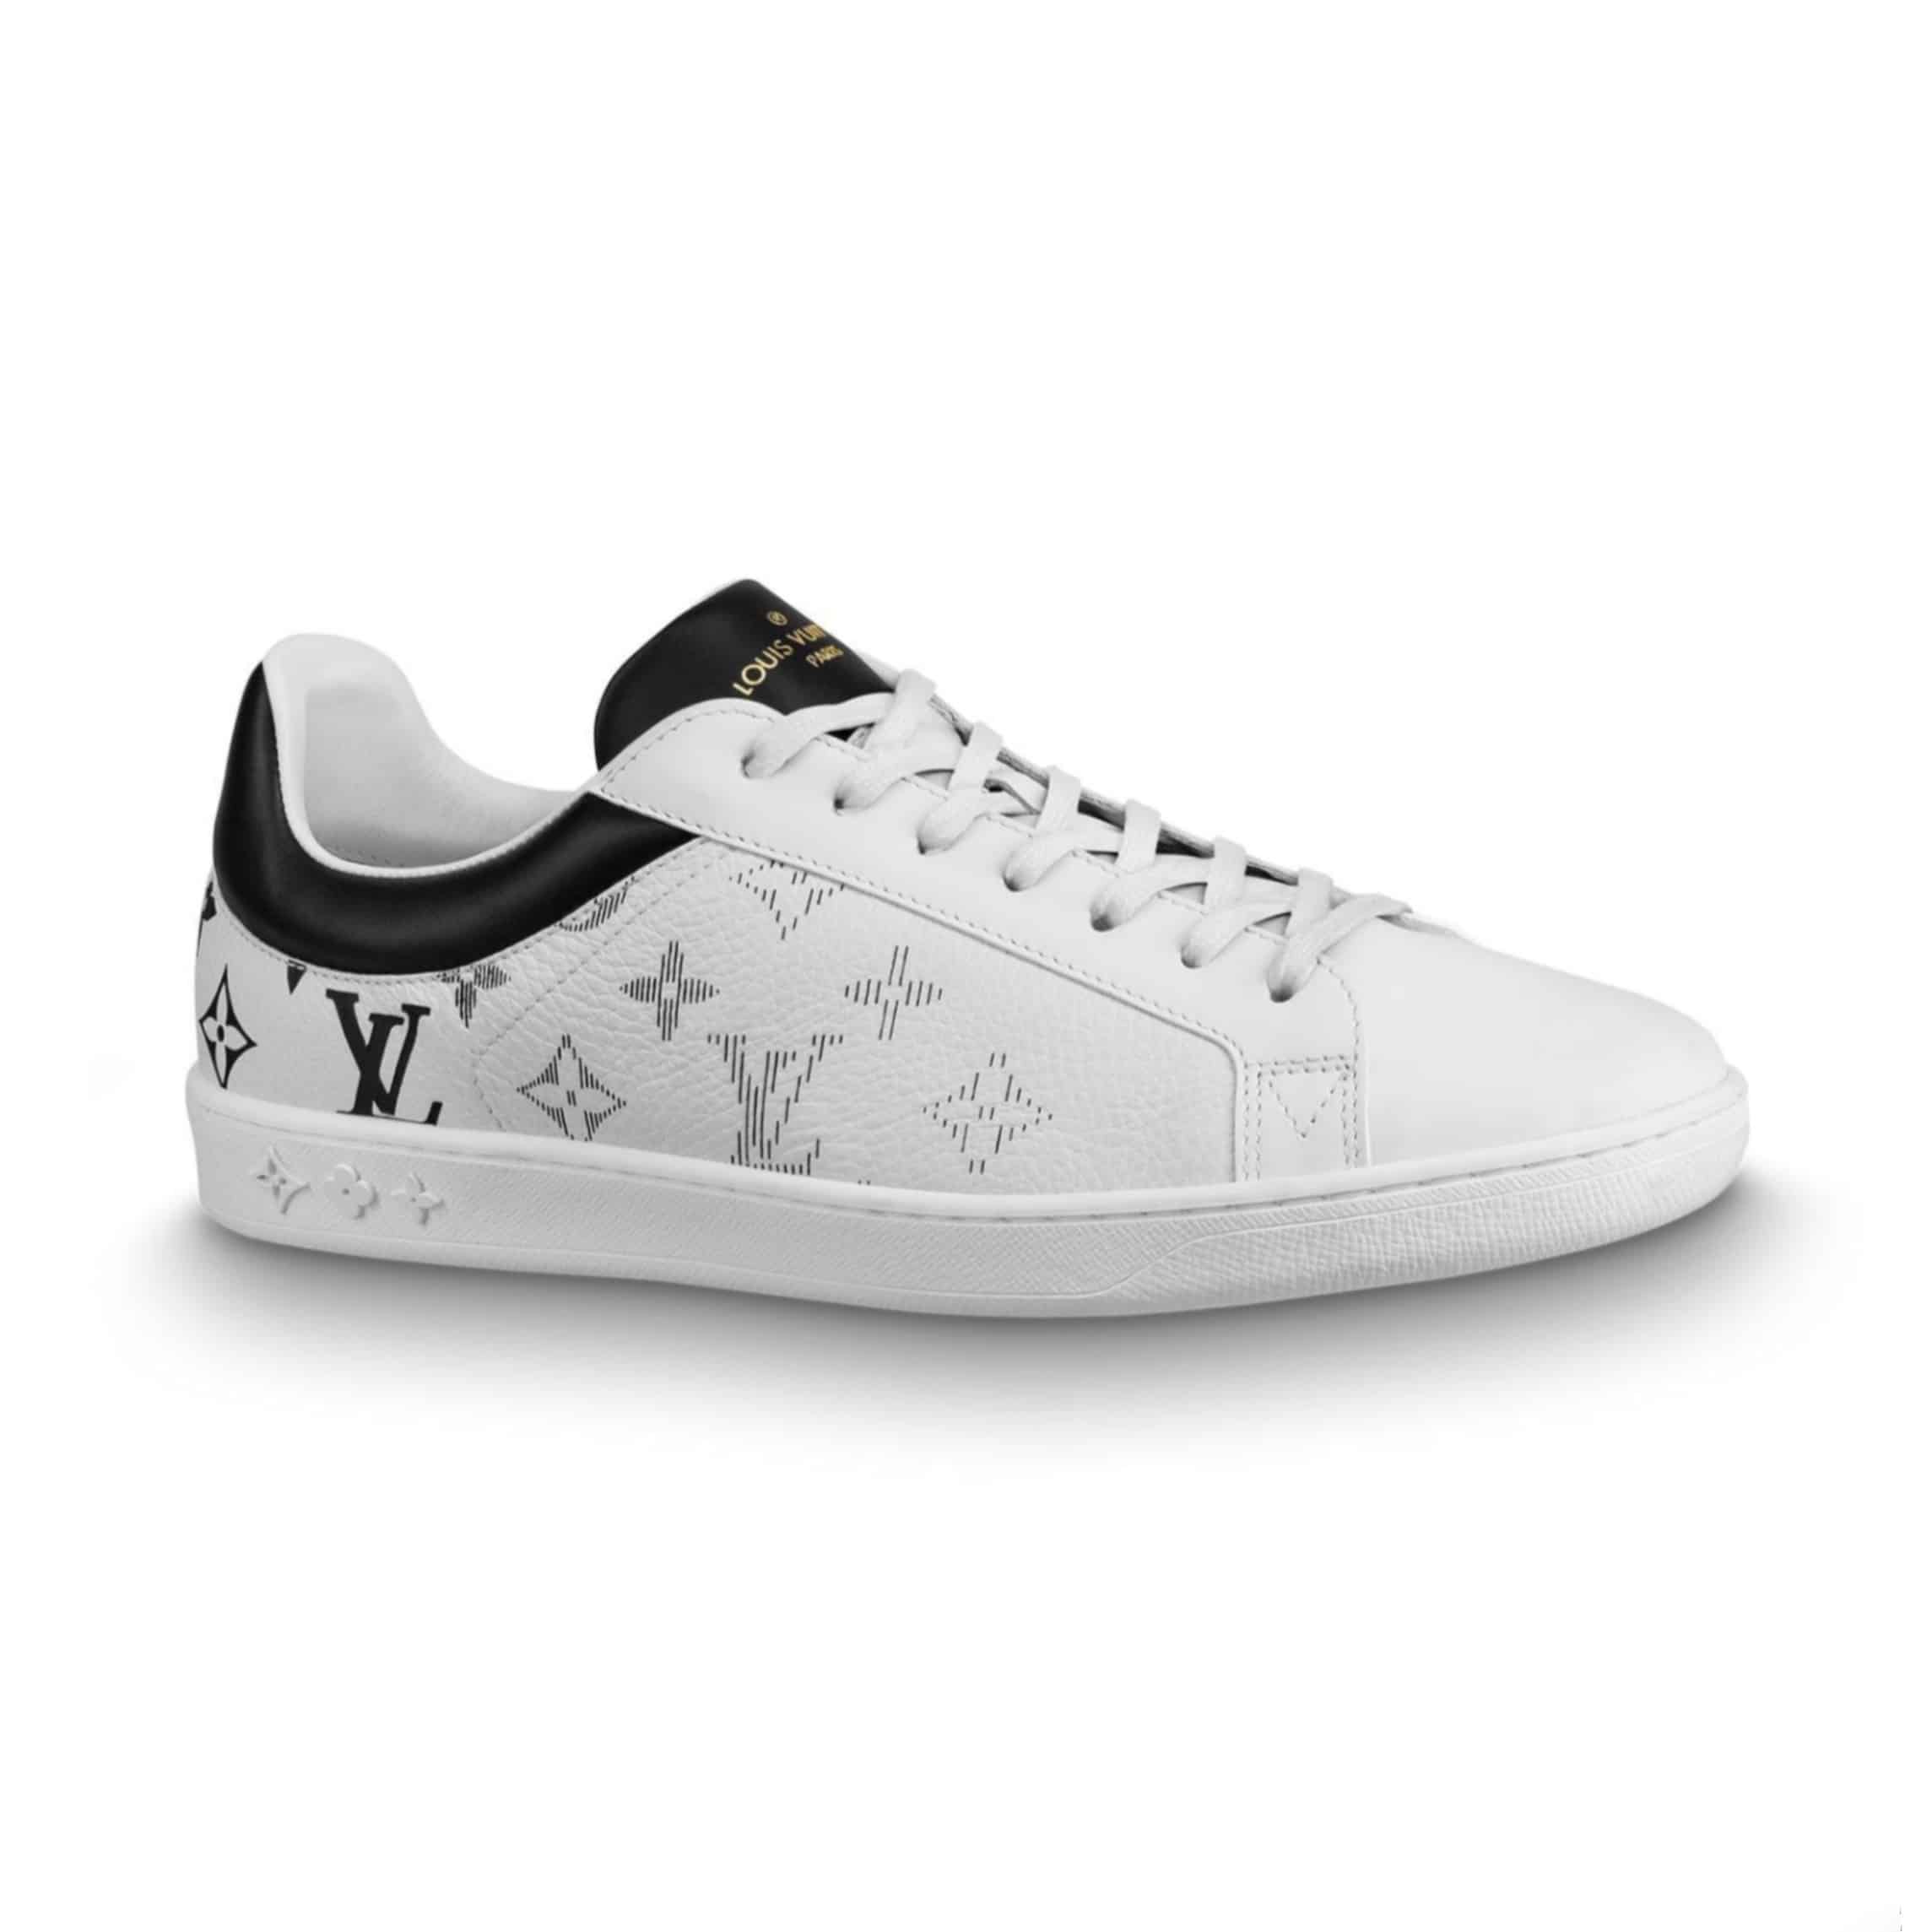 LOUIS VUITTON LUXEMBOURG SNEAKERS - LV82 - REPGOD.ORG/IS - Trusted